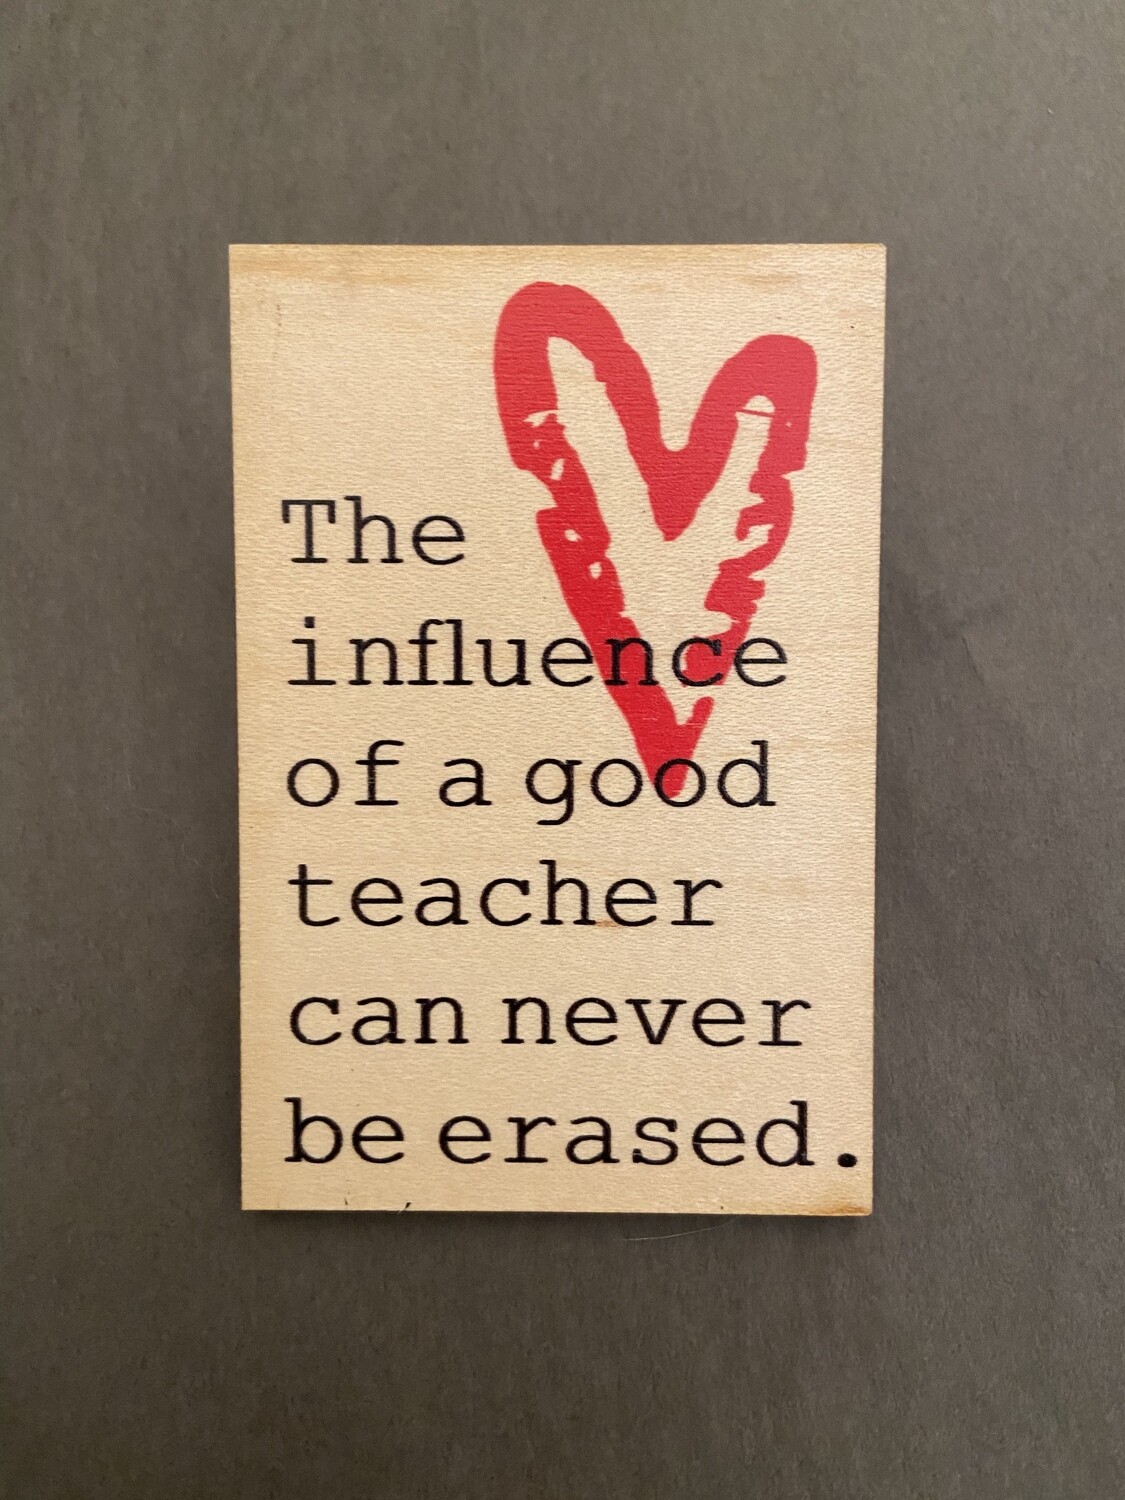 Magnet “The influence of a good teacher can never be erased”